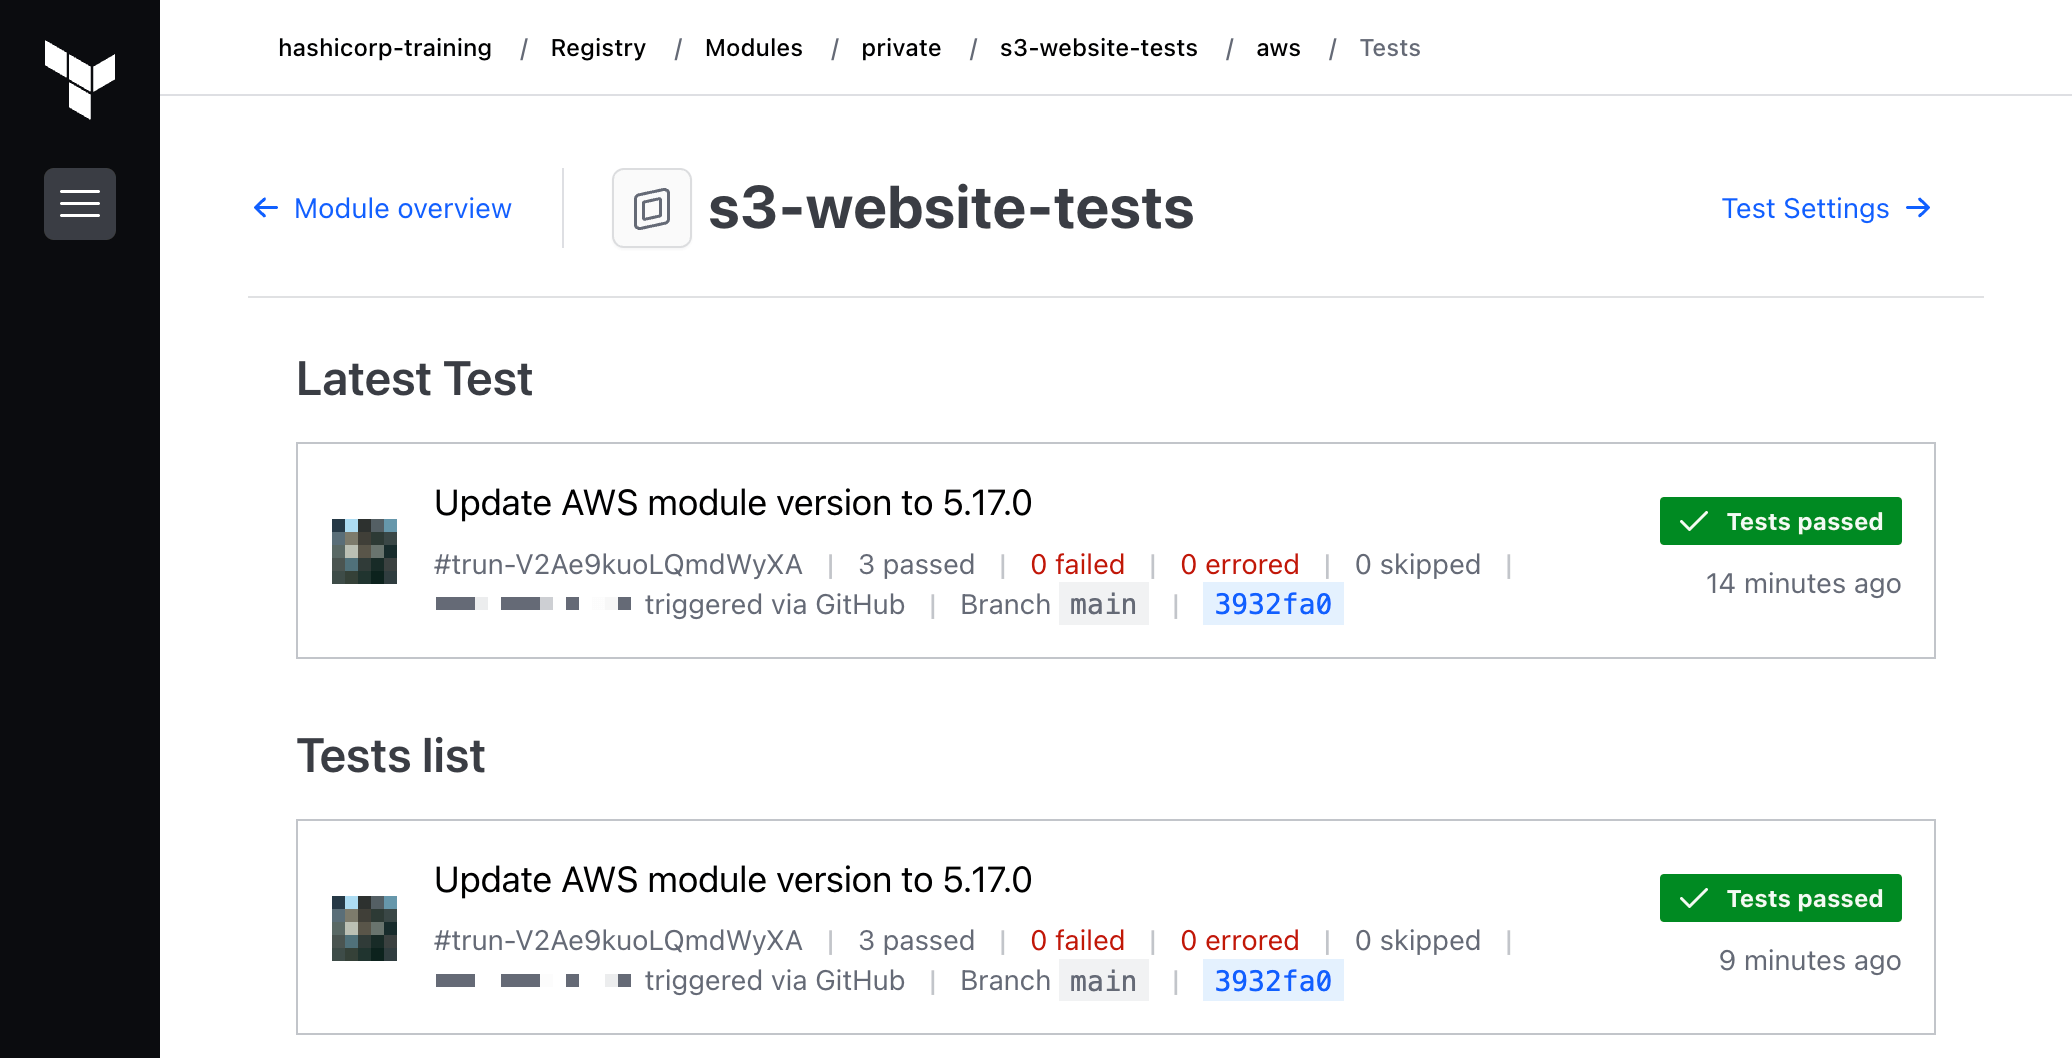 A list of all tests ran against the module. In this example, just one test result is shown with a badge that reads "Tests passed"